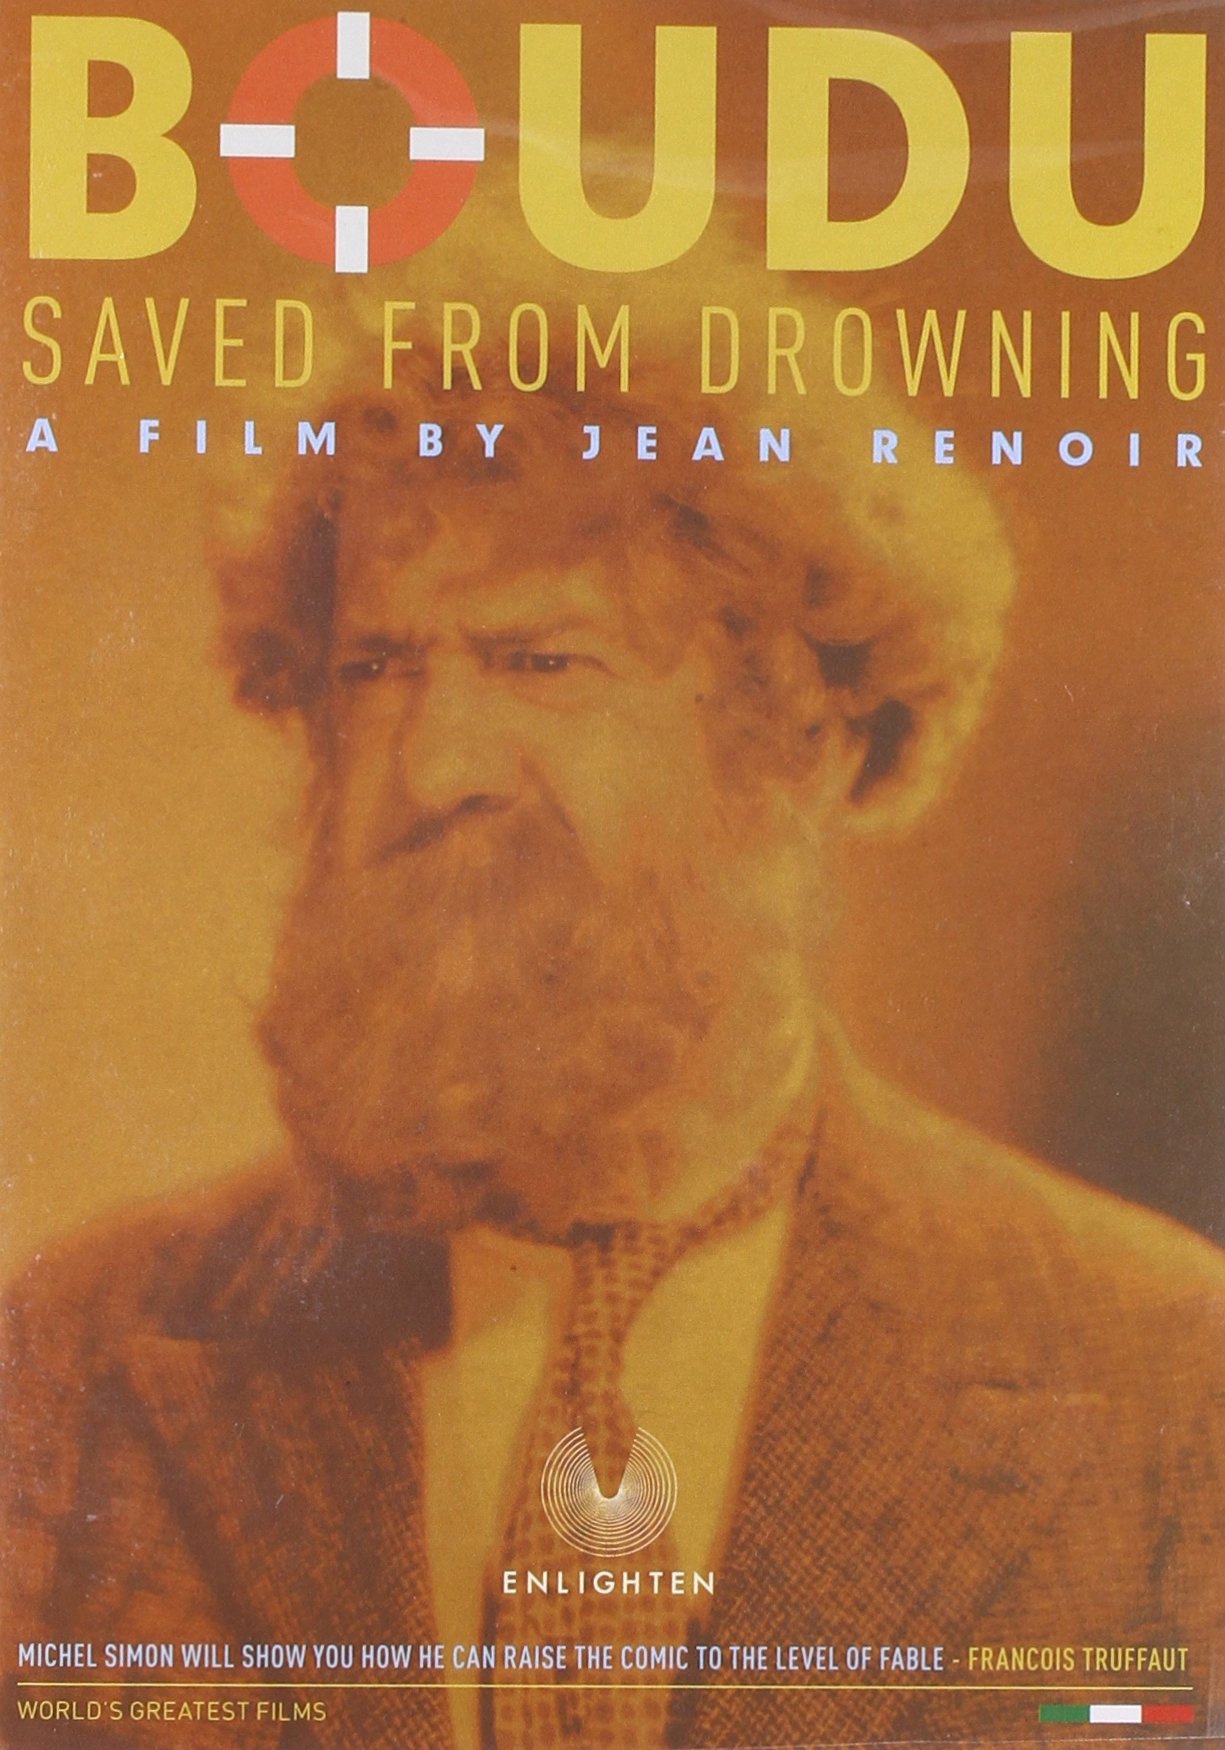 boudu-saved-from-drowning-movie-purchase-or-watch-online